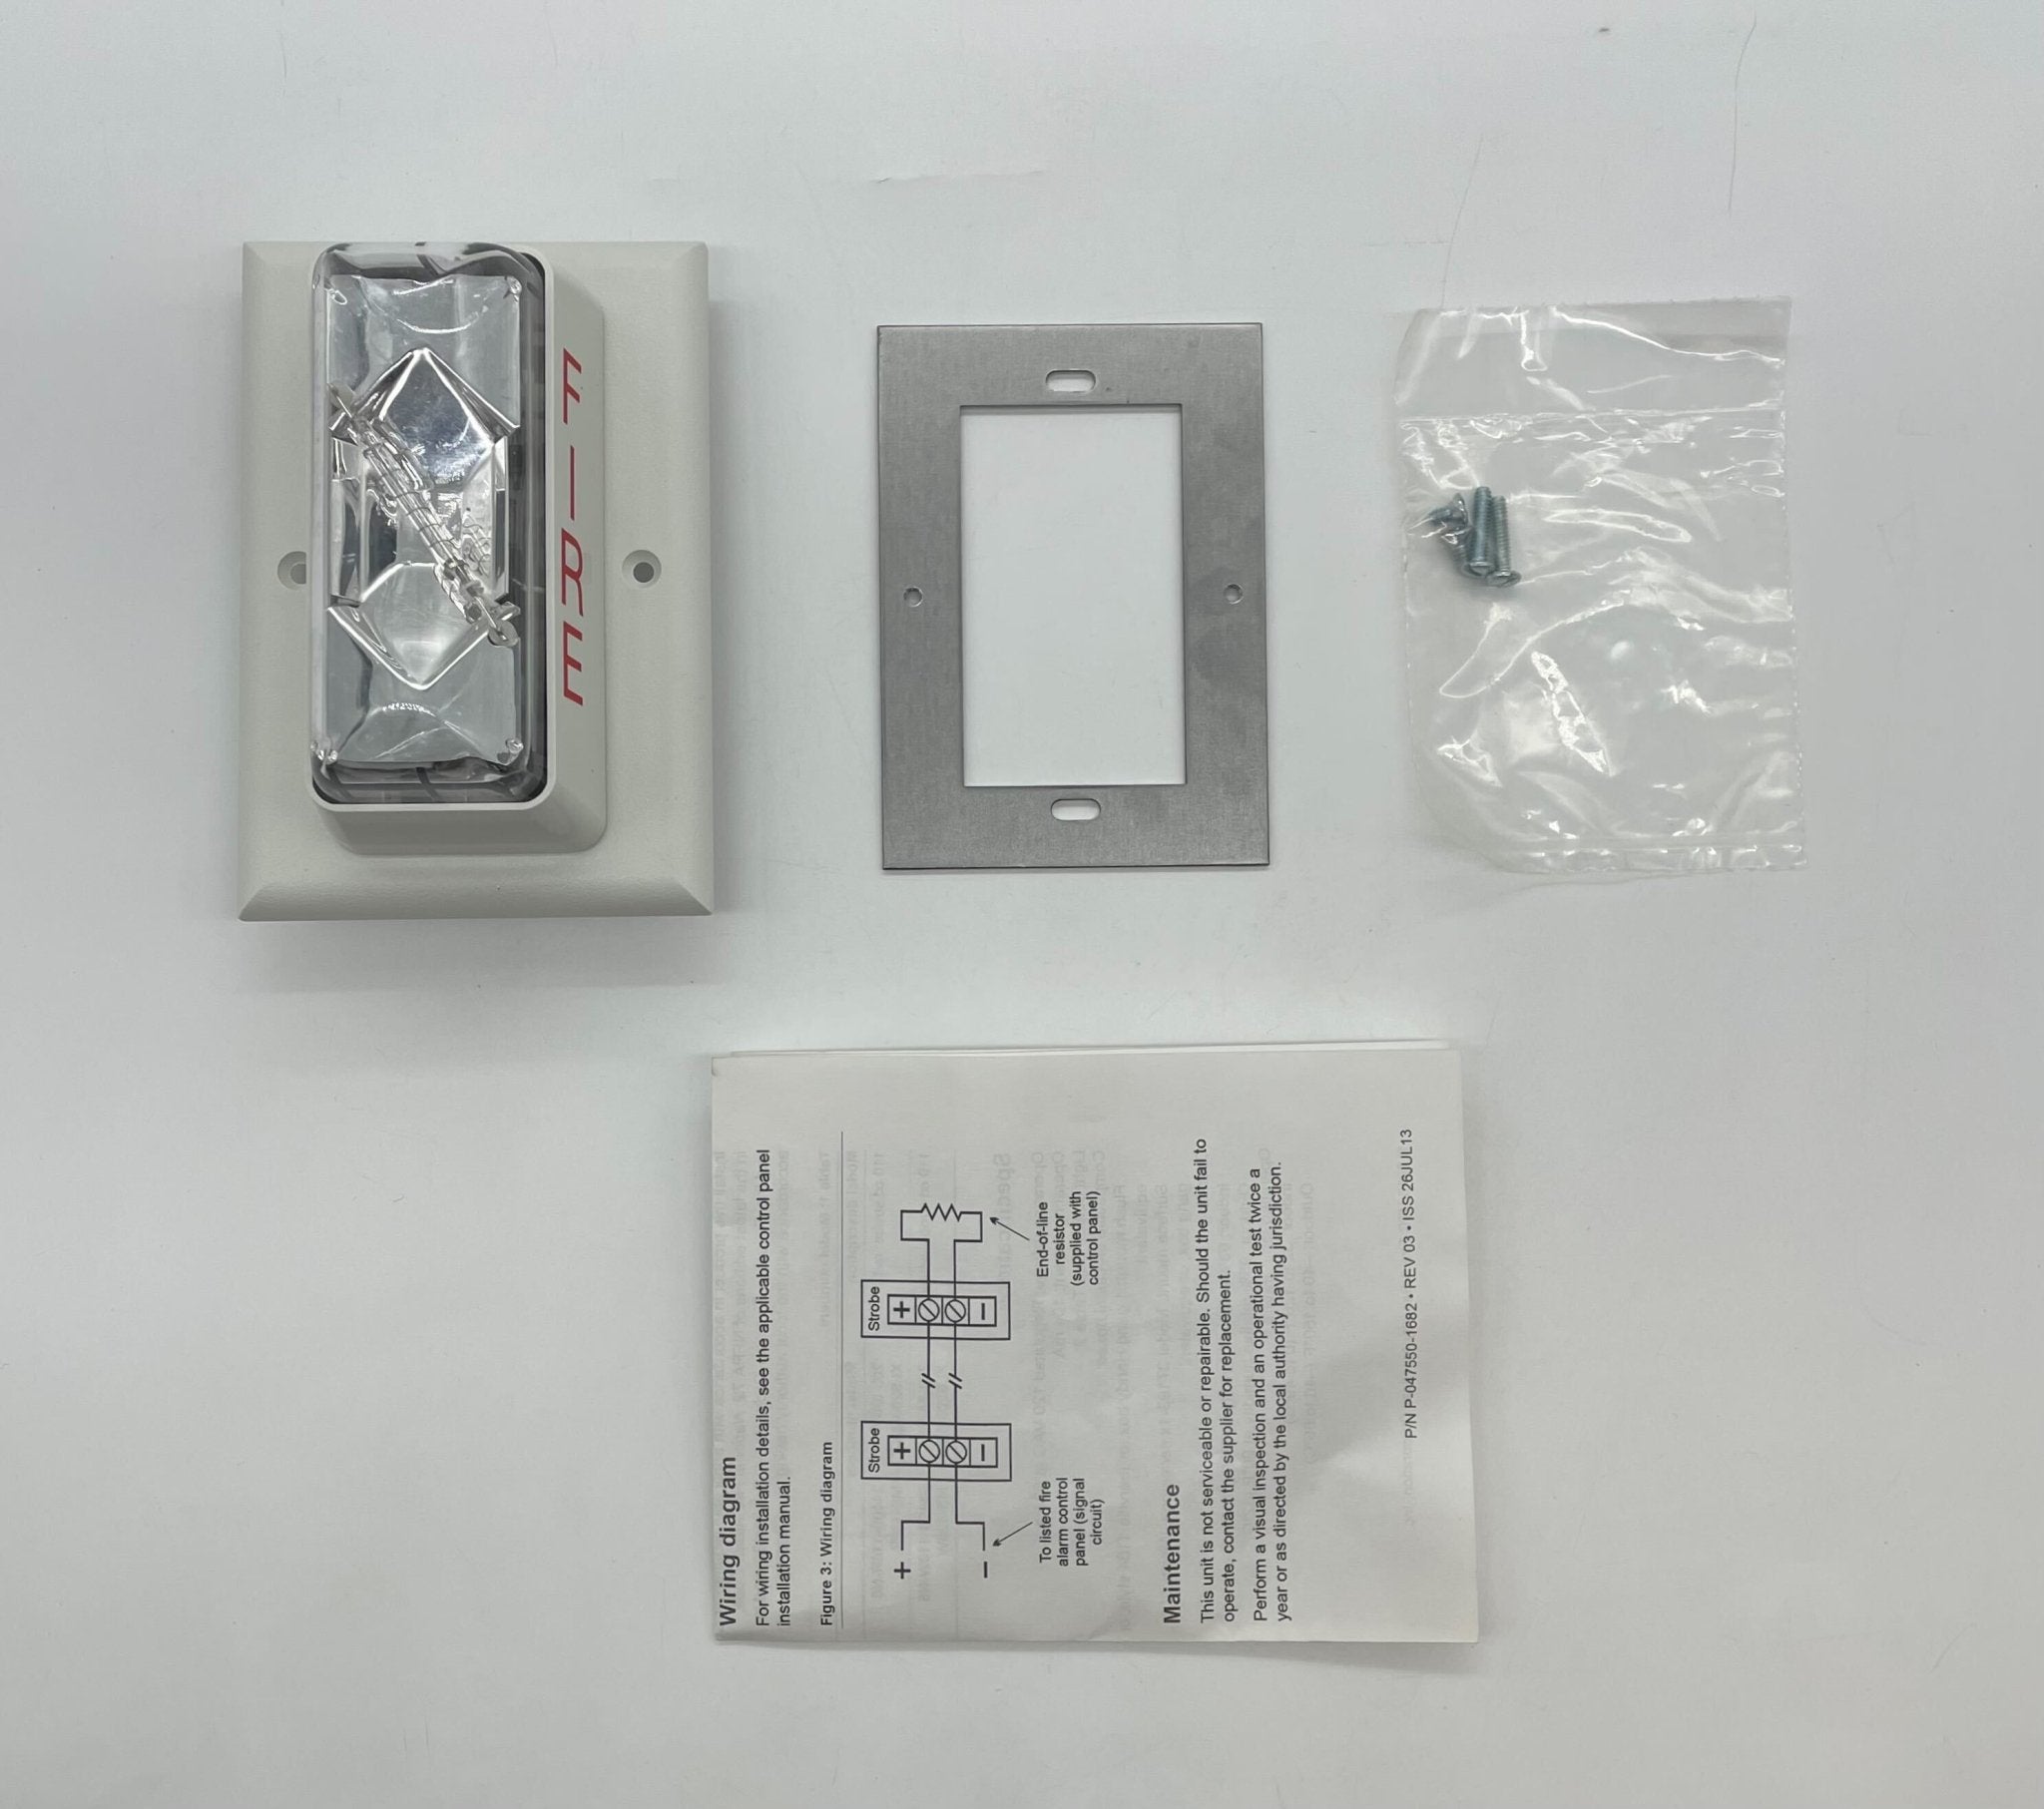 Edwards 203-8A-TW - The Fire Alarm Supplier